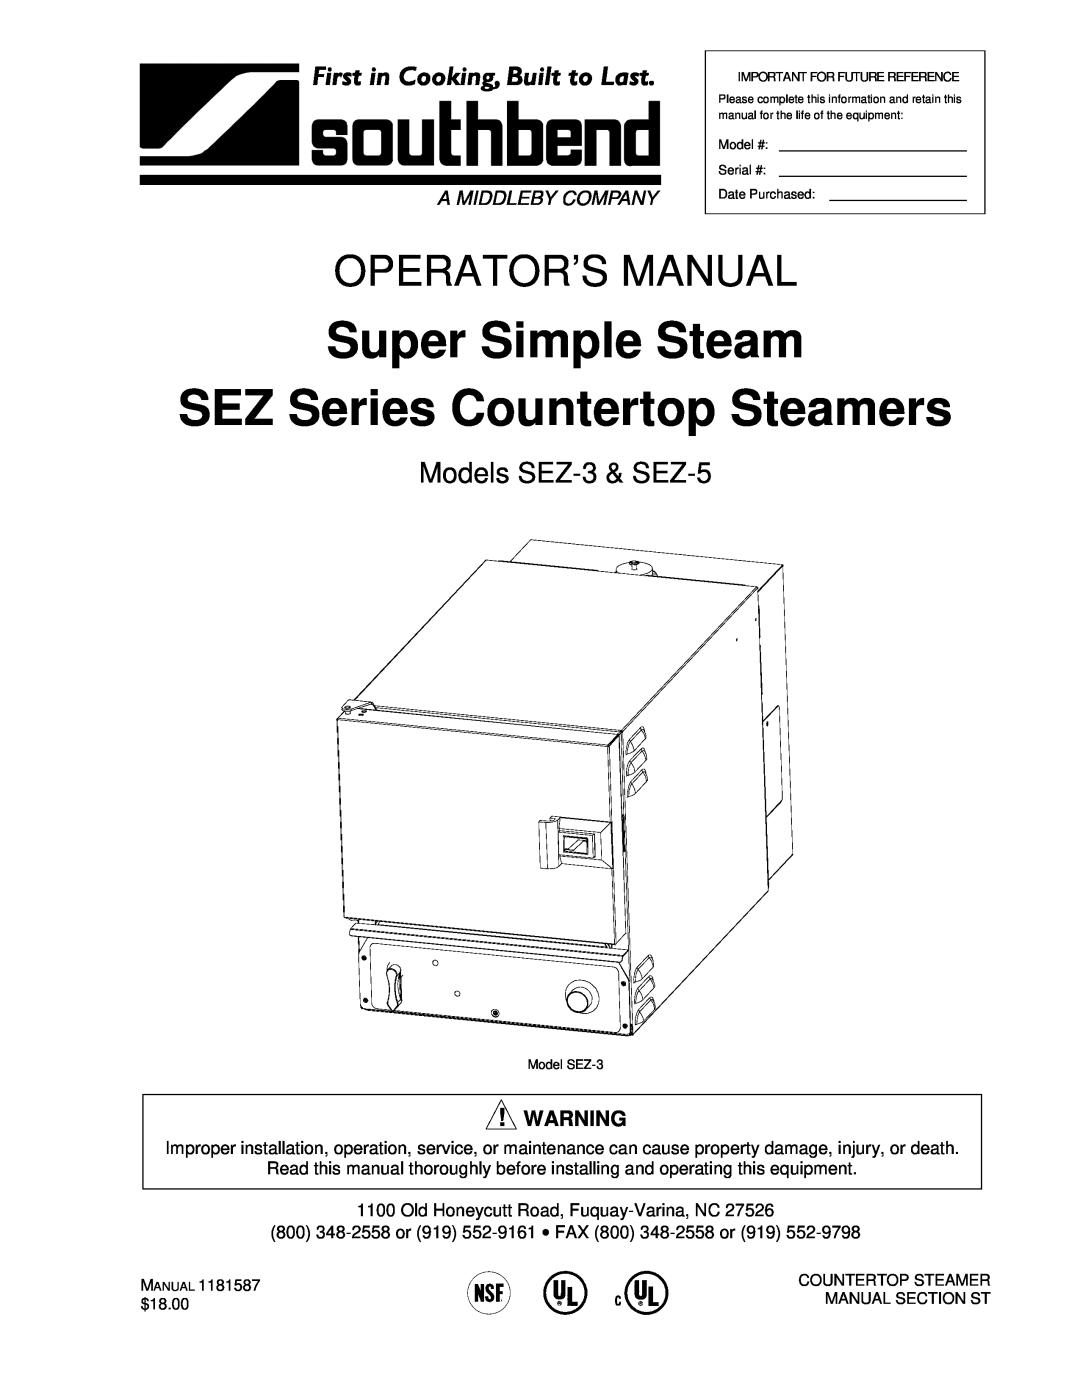 Southbend manual Super Simple Steam SEZ Series Countertop Steamers, Operator’S Manual, Models SEZ-3 & SEZ-5 